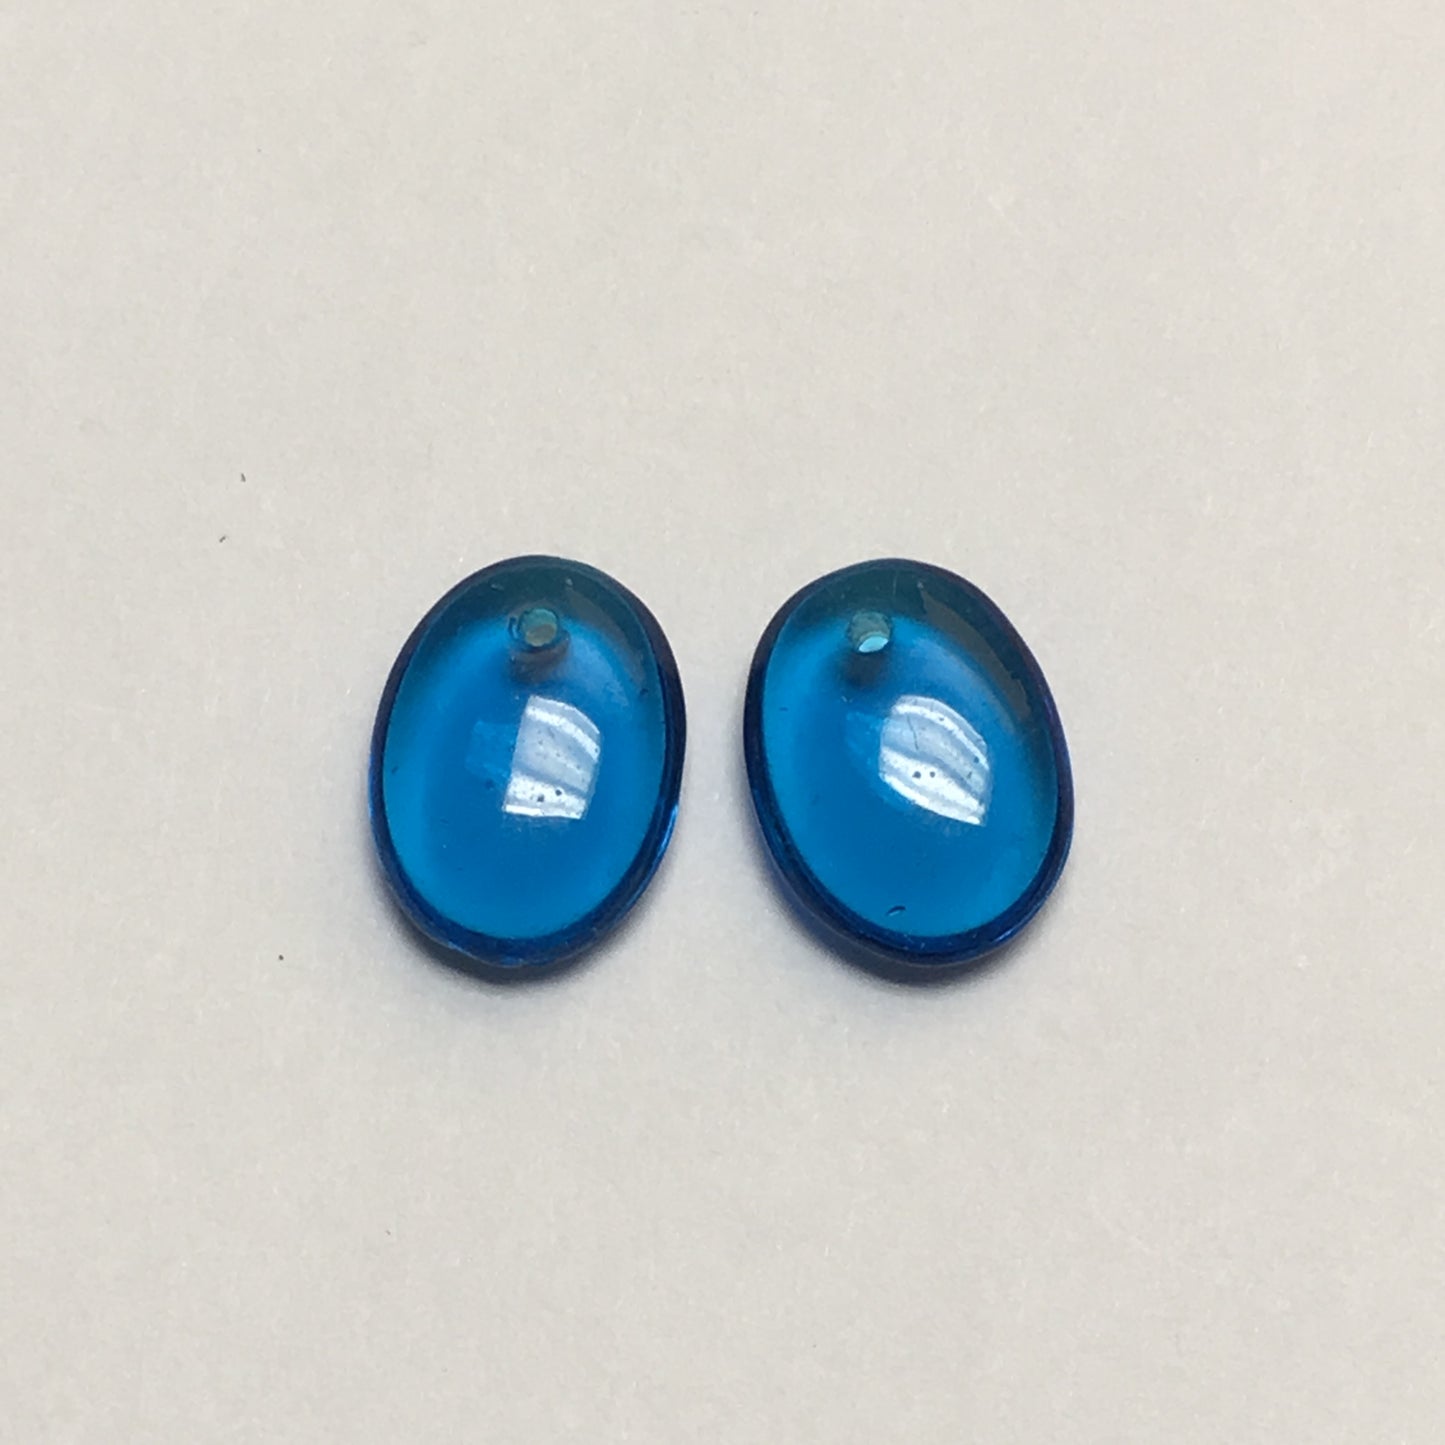 Sapphire Blue Glass Flat Oval Top Drilled Go Go Beads, 11 x 8 x 3 mm, 2 Beads,